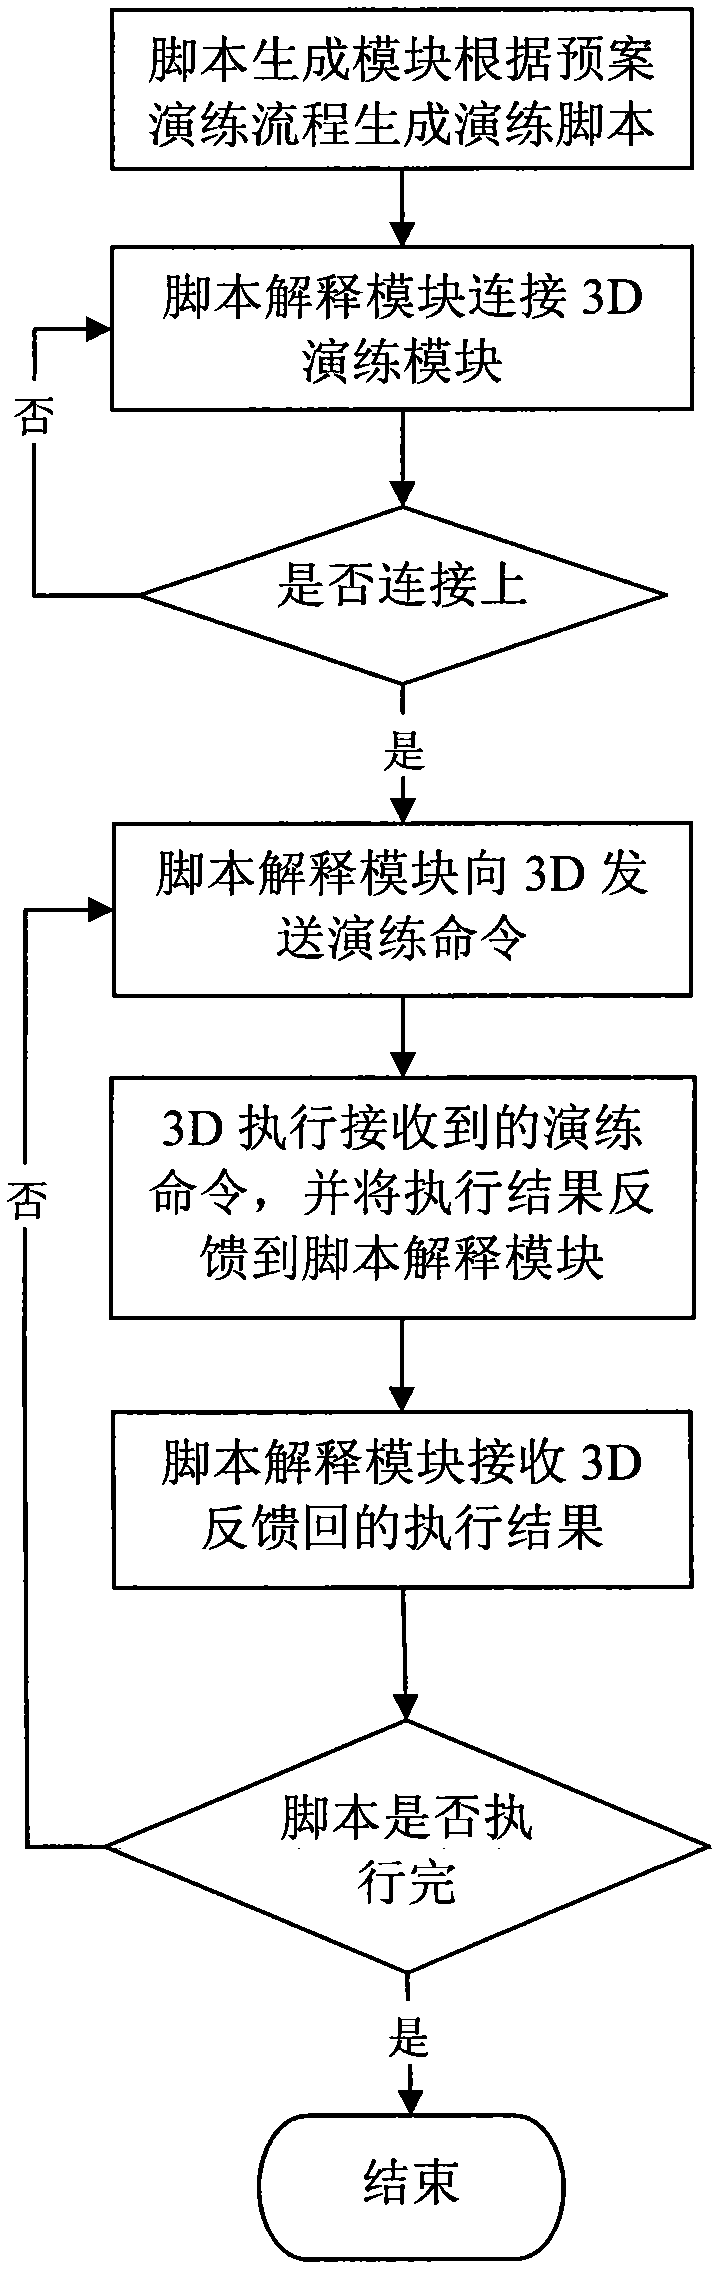 Automatic demonstration system and realizing method for 3-dimensioinal (3D) visual emergency plan